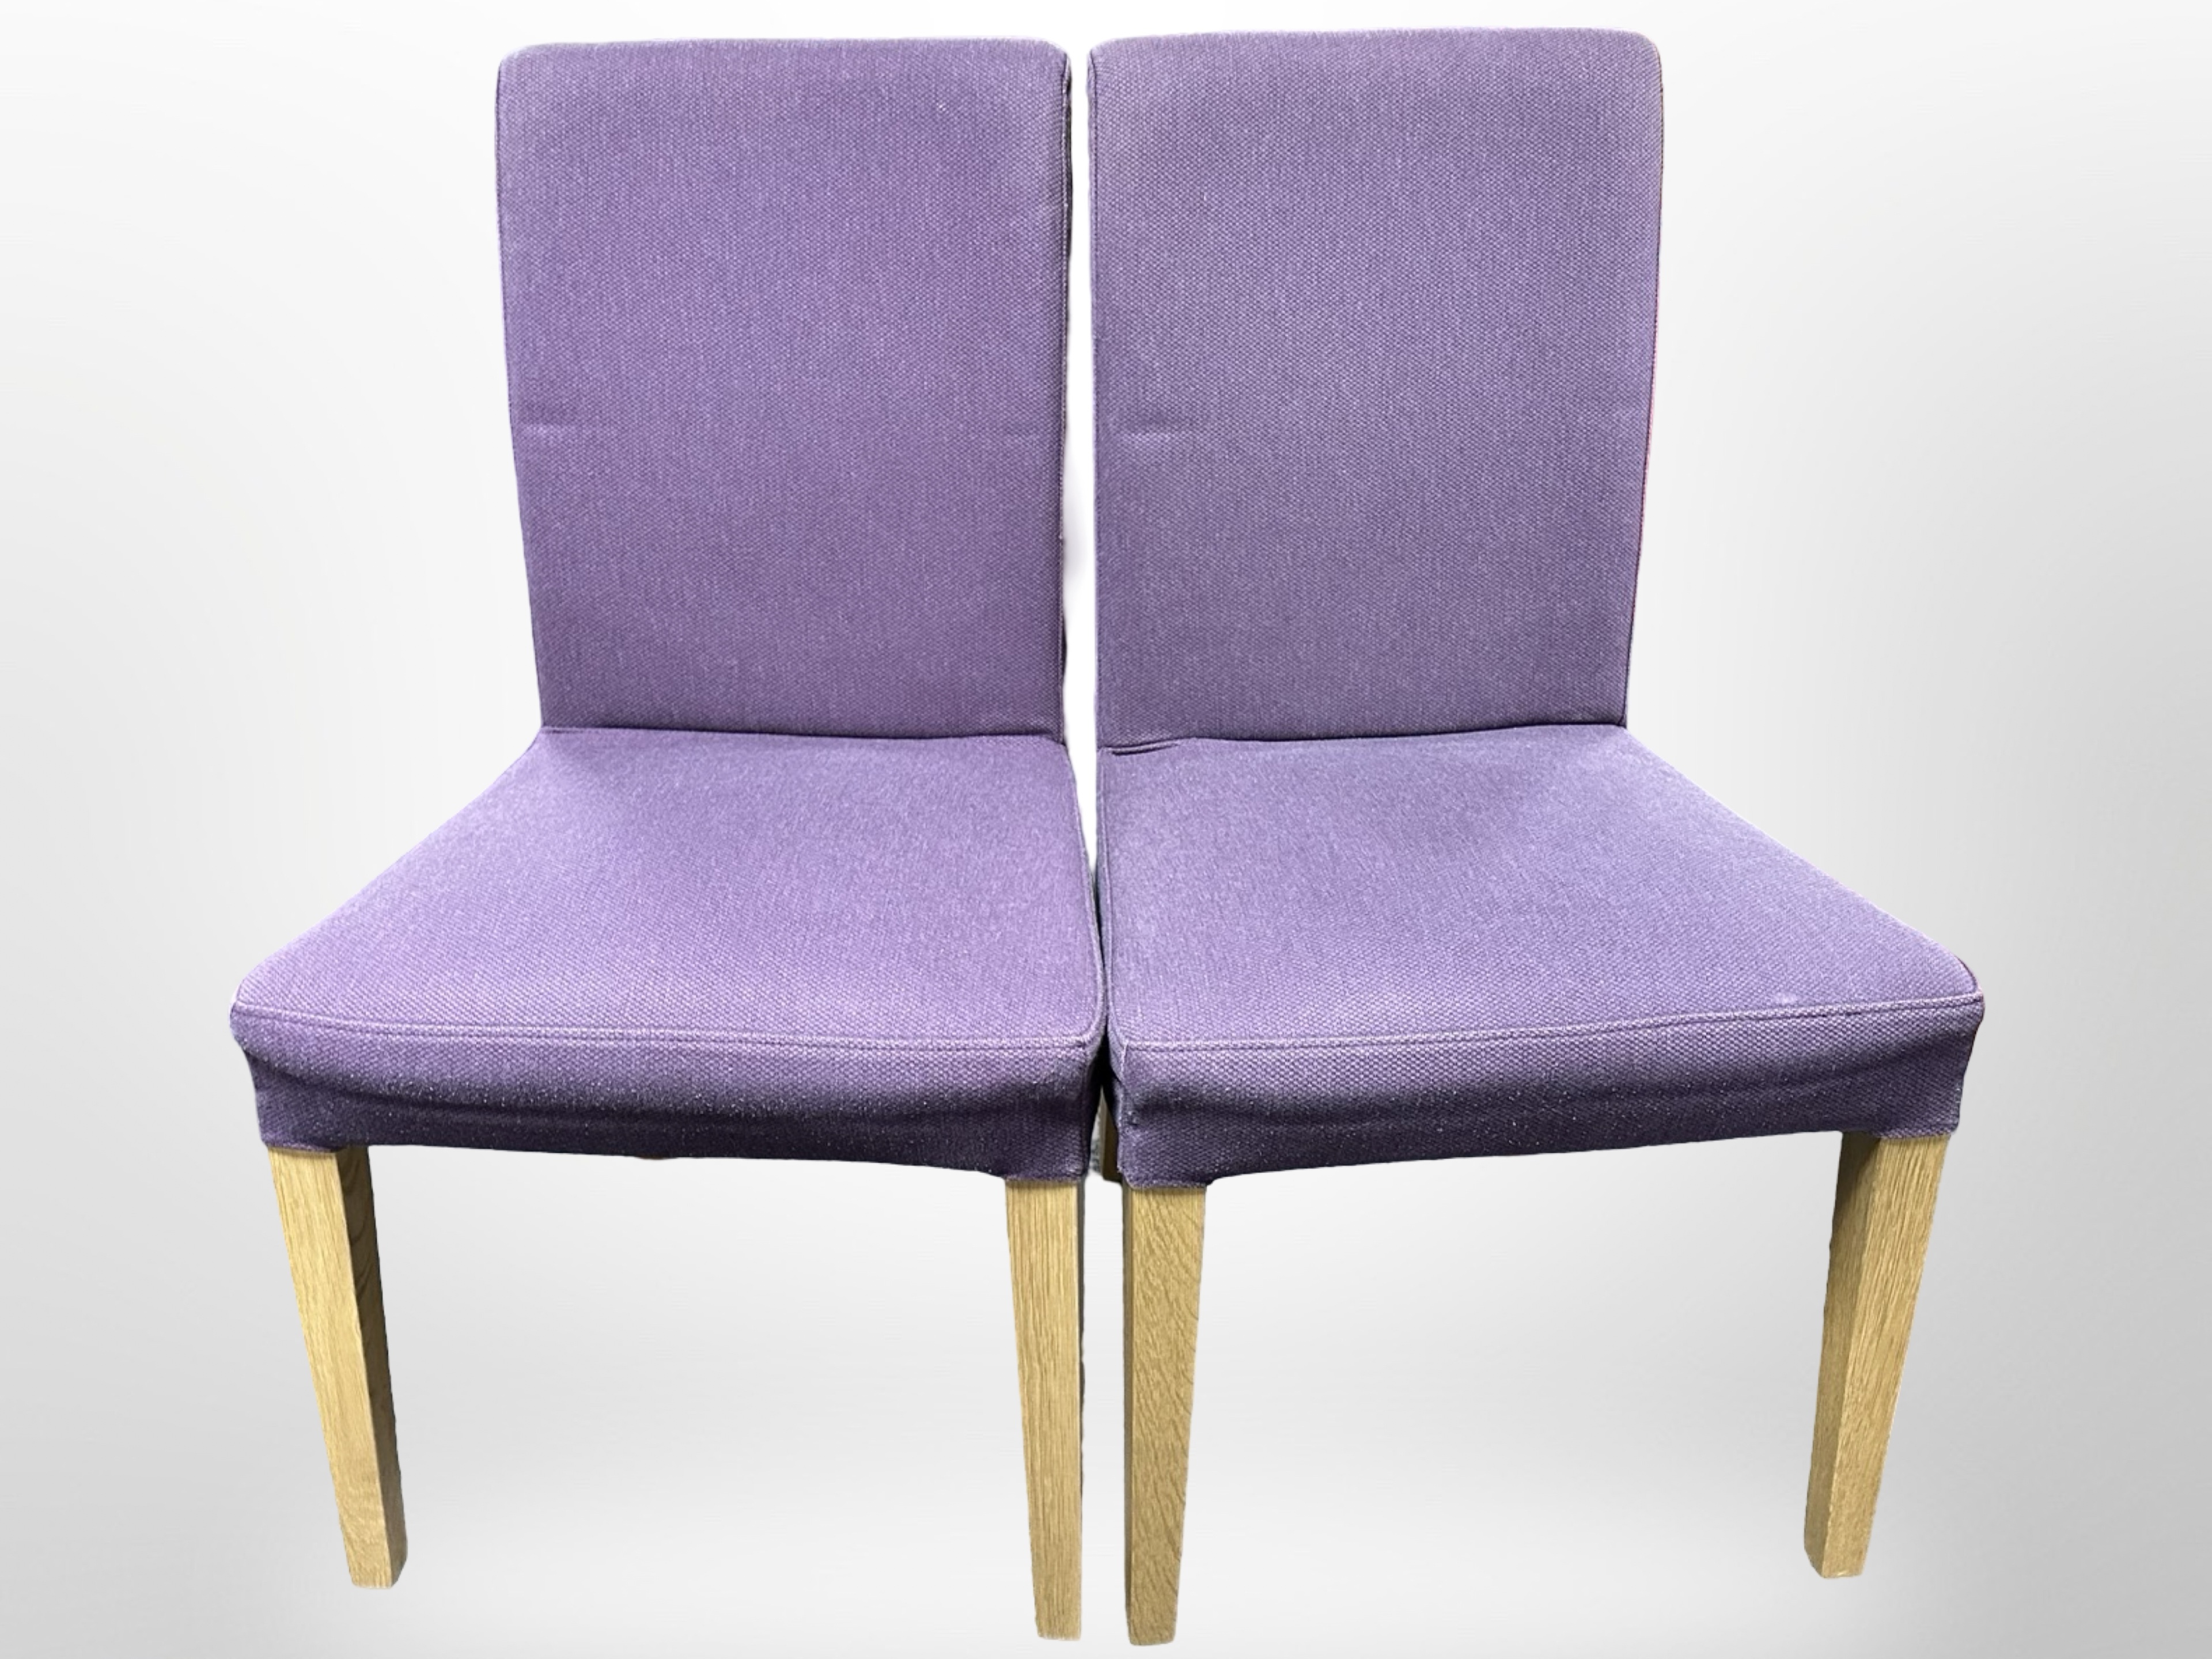 A set of six Ikea dining chairs in purple upholstery - Image 2 of 2